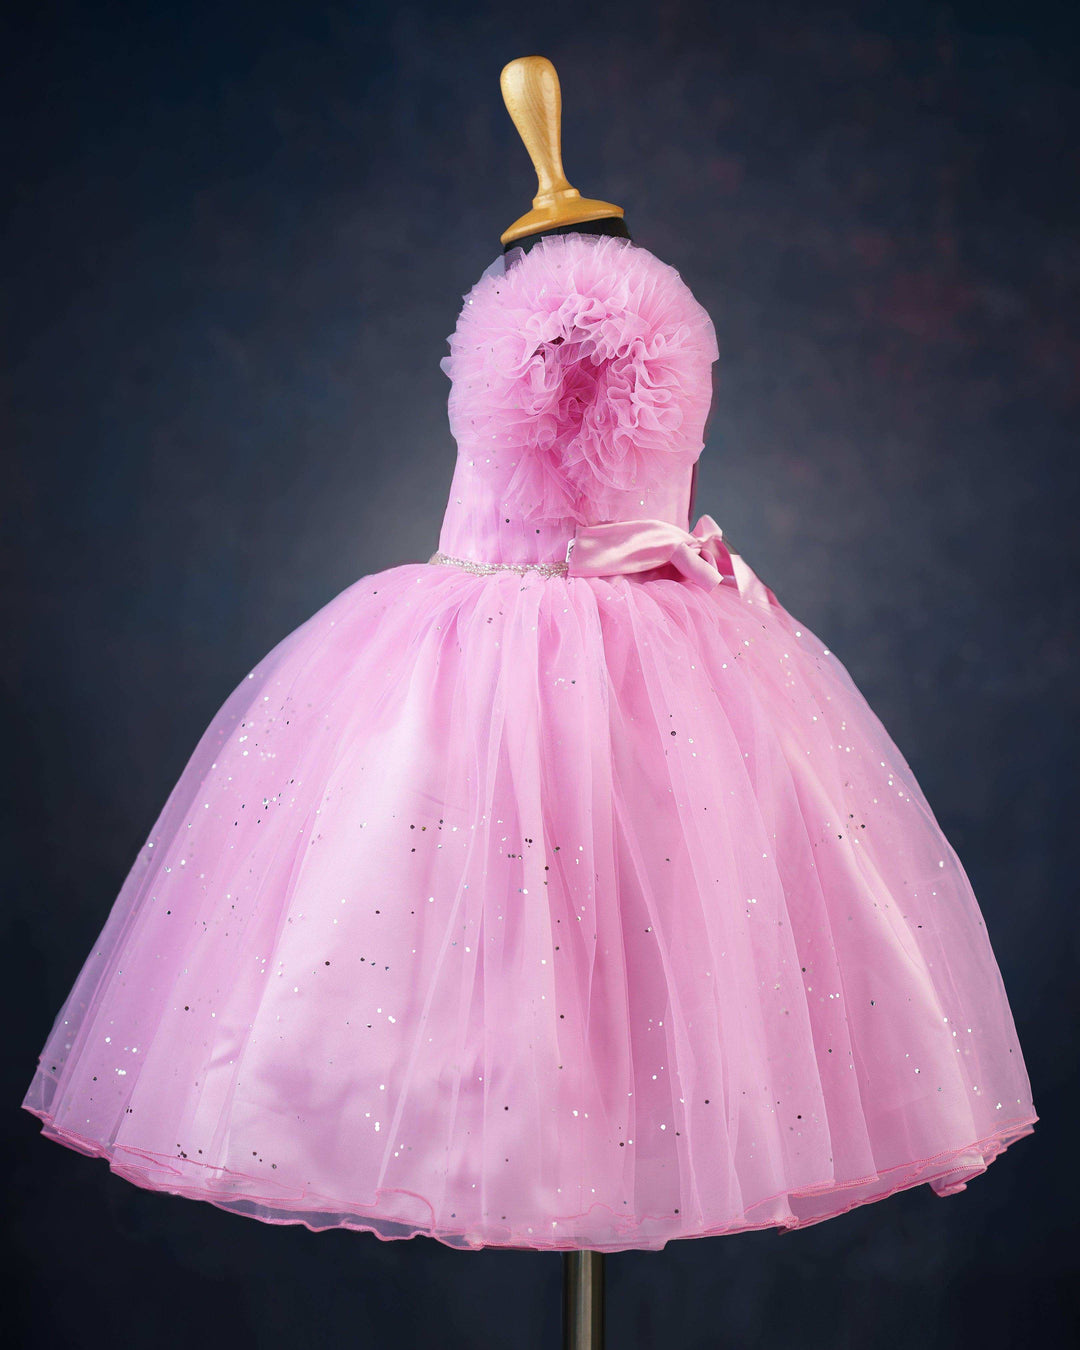 Baby Pink Glitter Baby-Girls Party Perfect Birthday Frock

Material Baby pink shade glitter party perfect frock is made with soft nylon net fabric. The yoke portion of the frock is designed in transparent neck with pleated